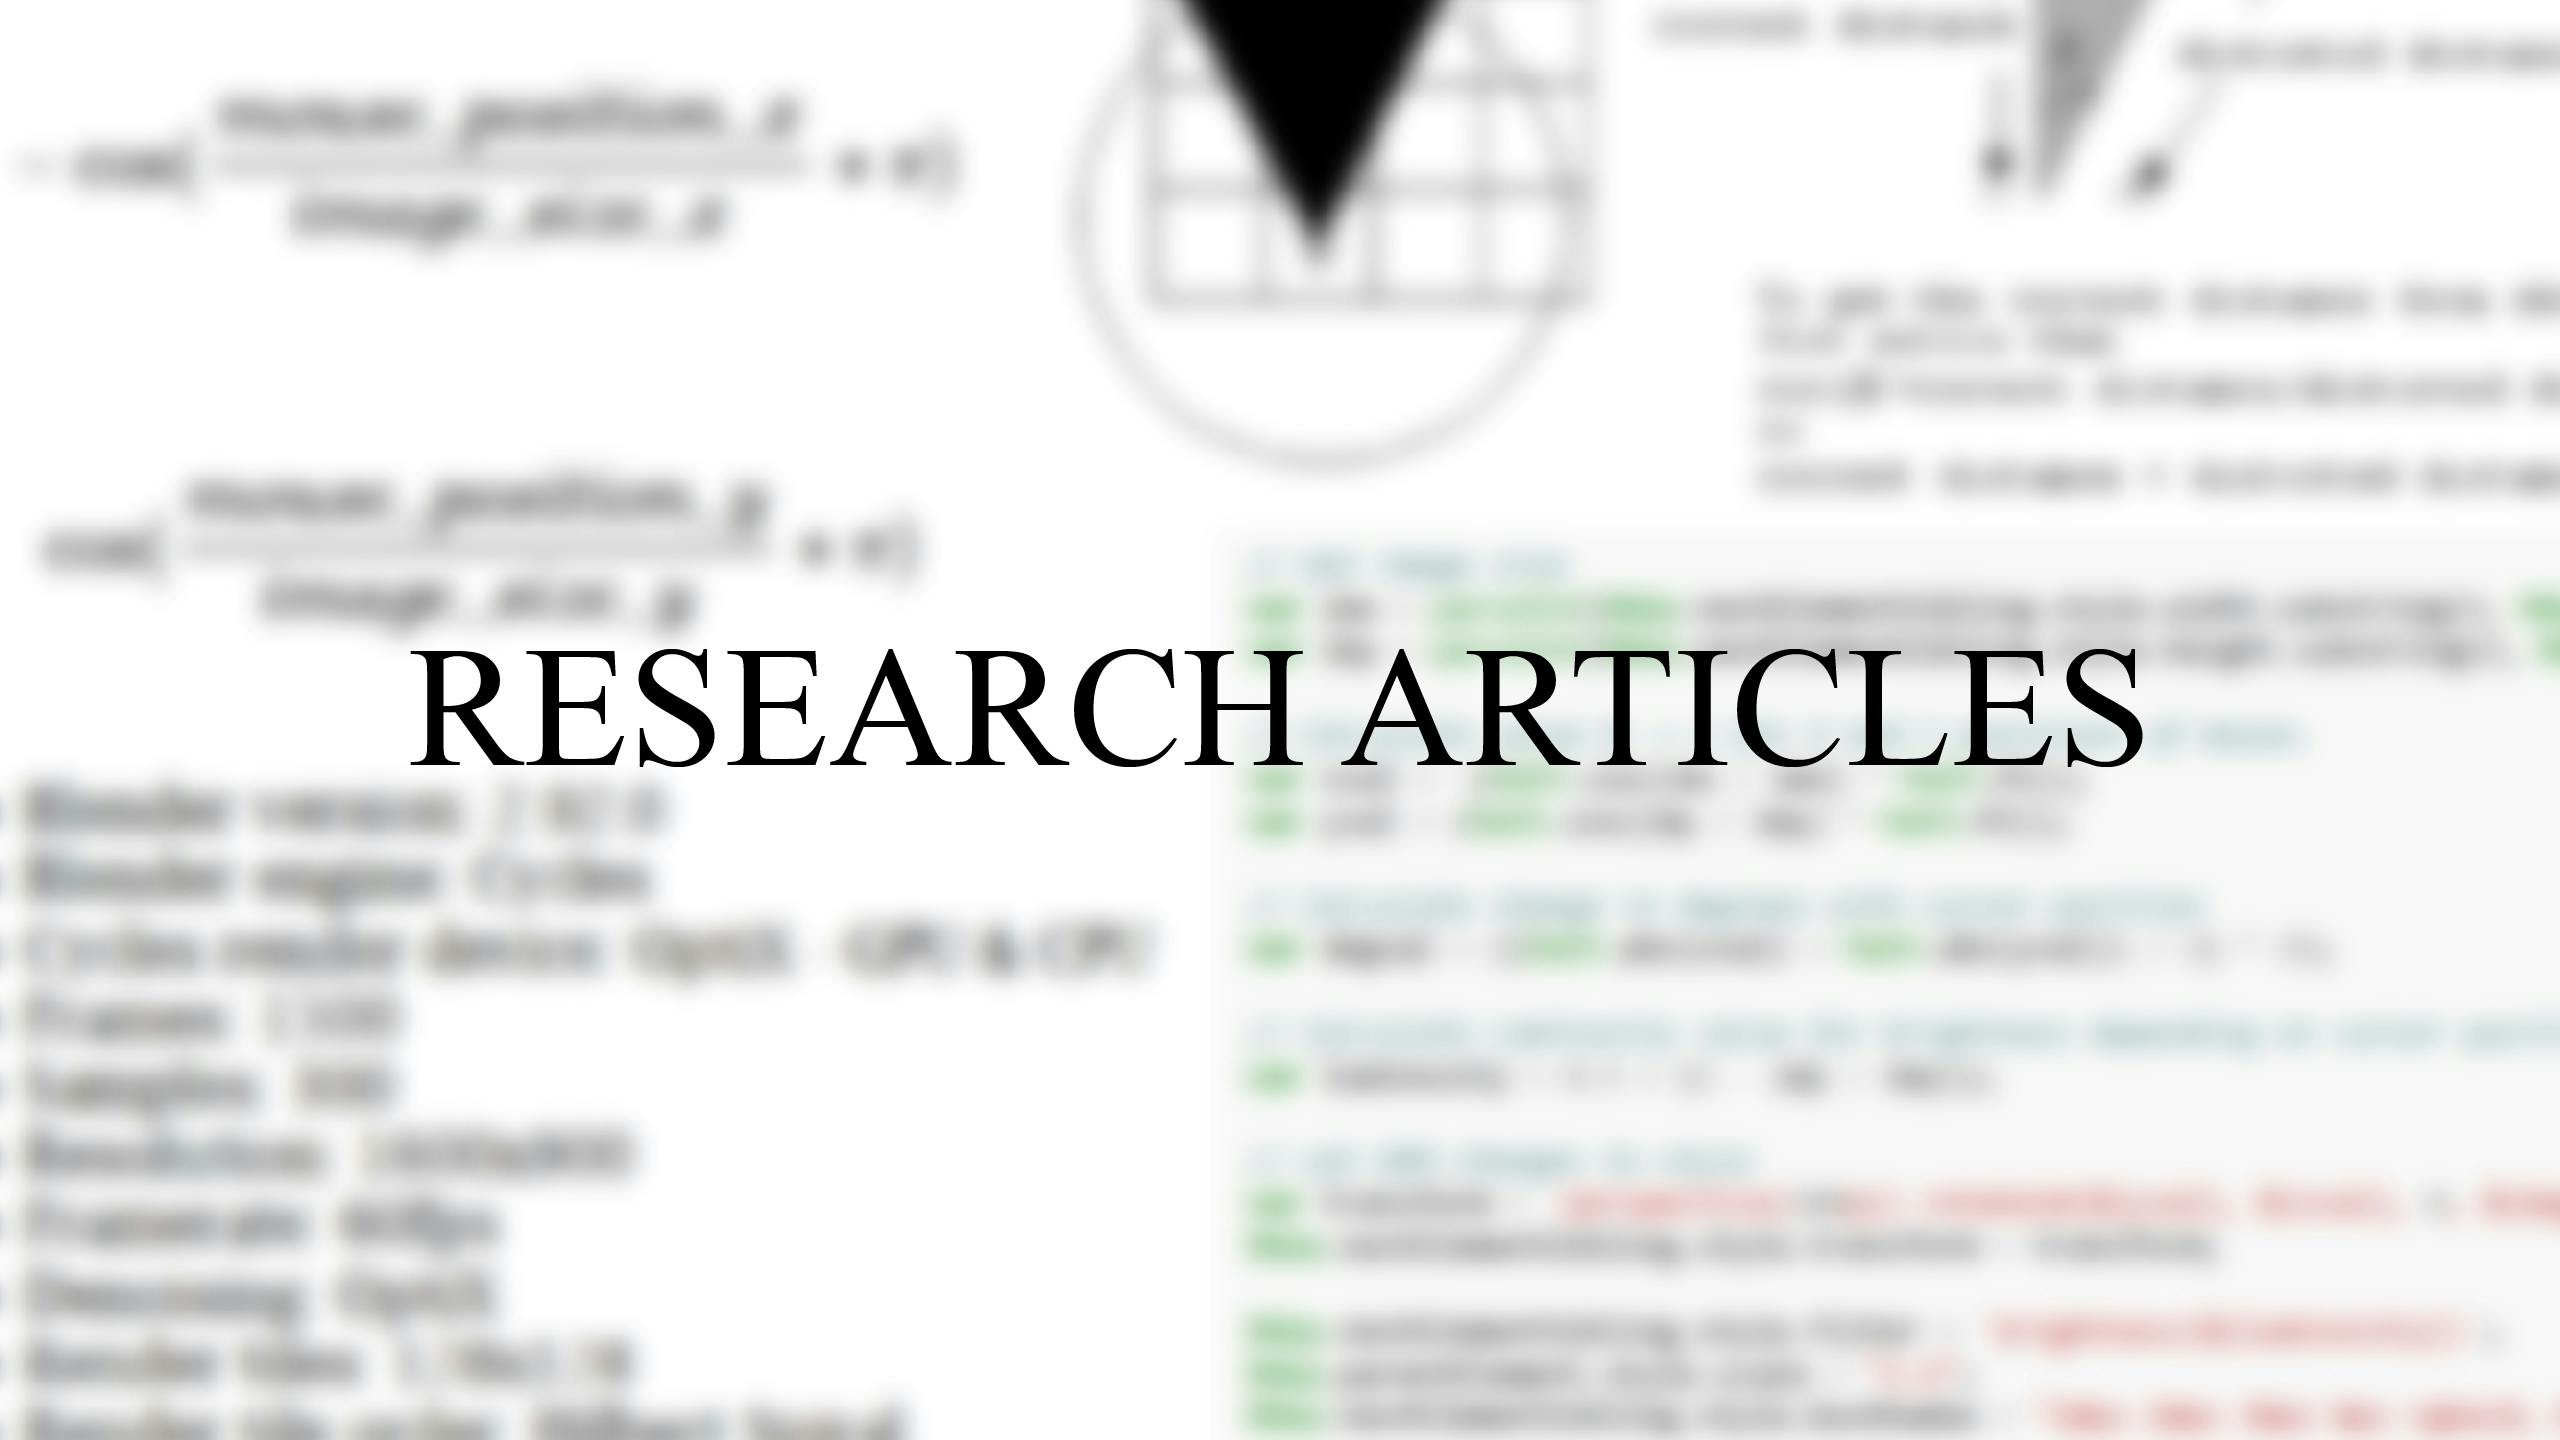 Research articles cover art